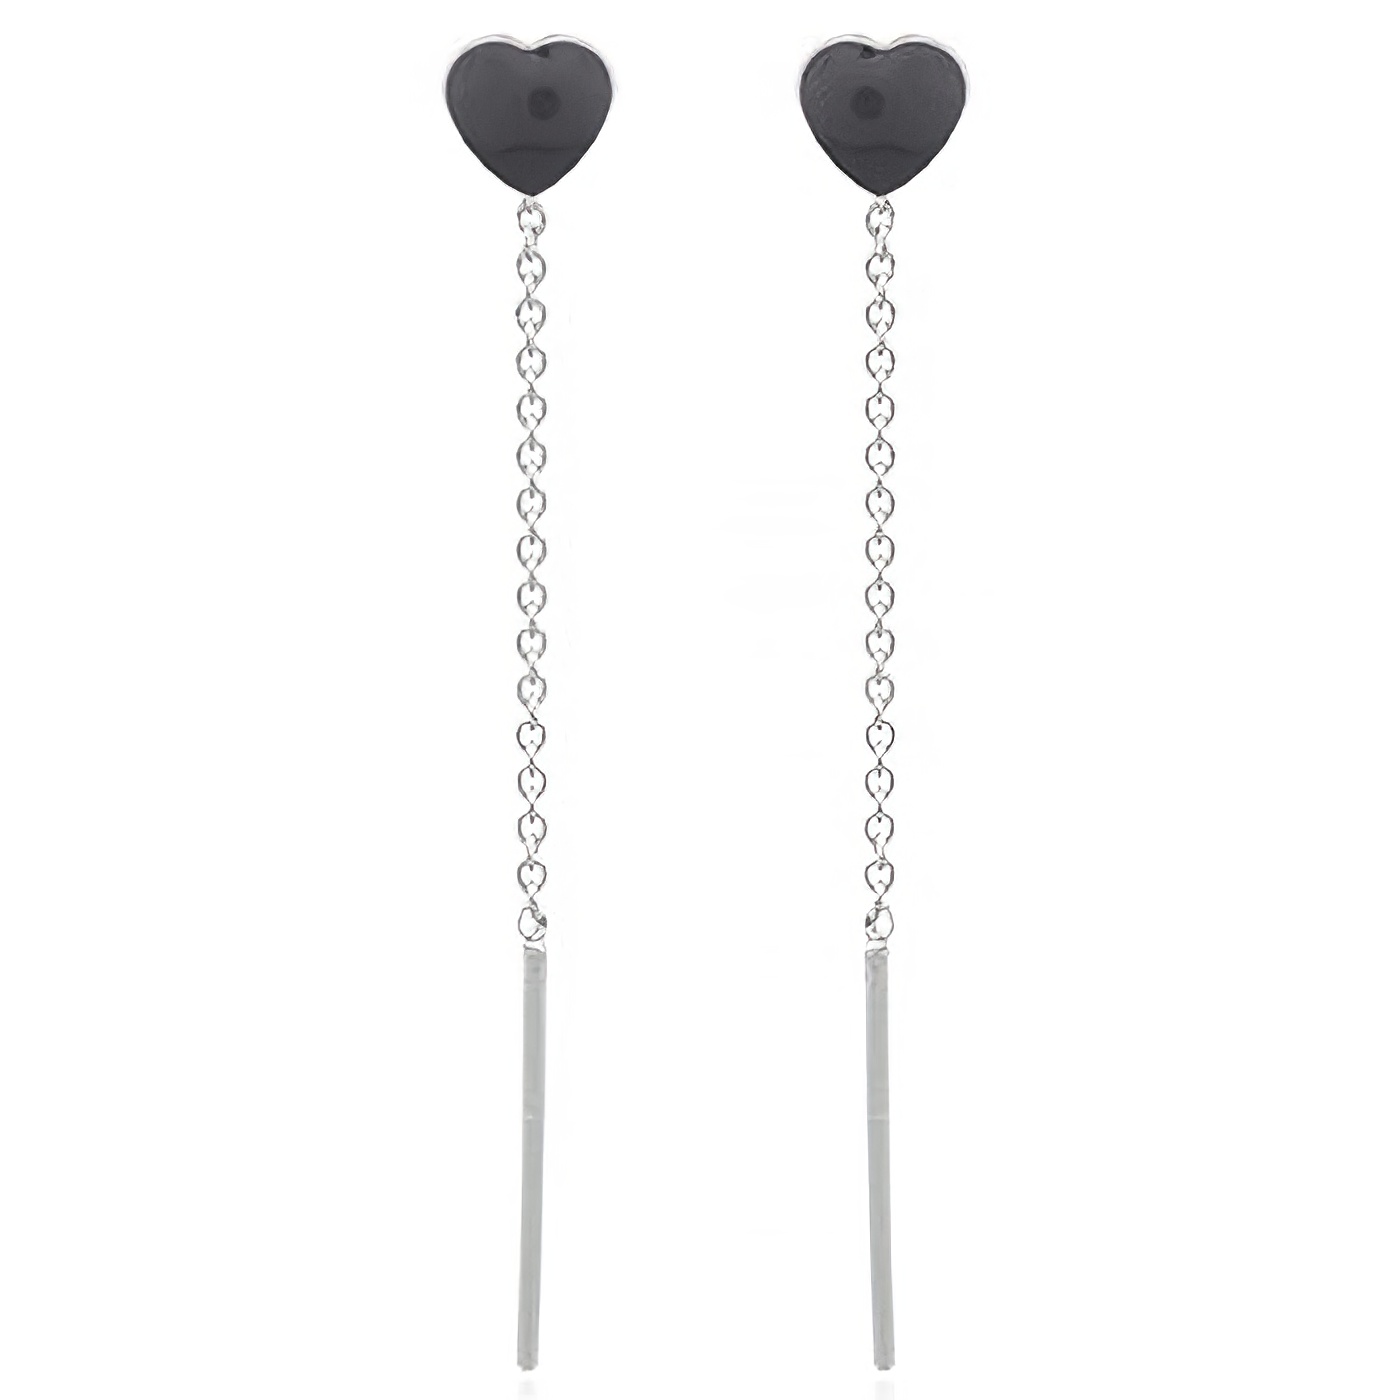 Reconstituted Stone Black Heart 925 Silver Threader Earrings by BeYindi 